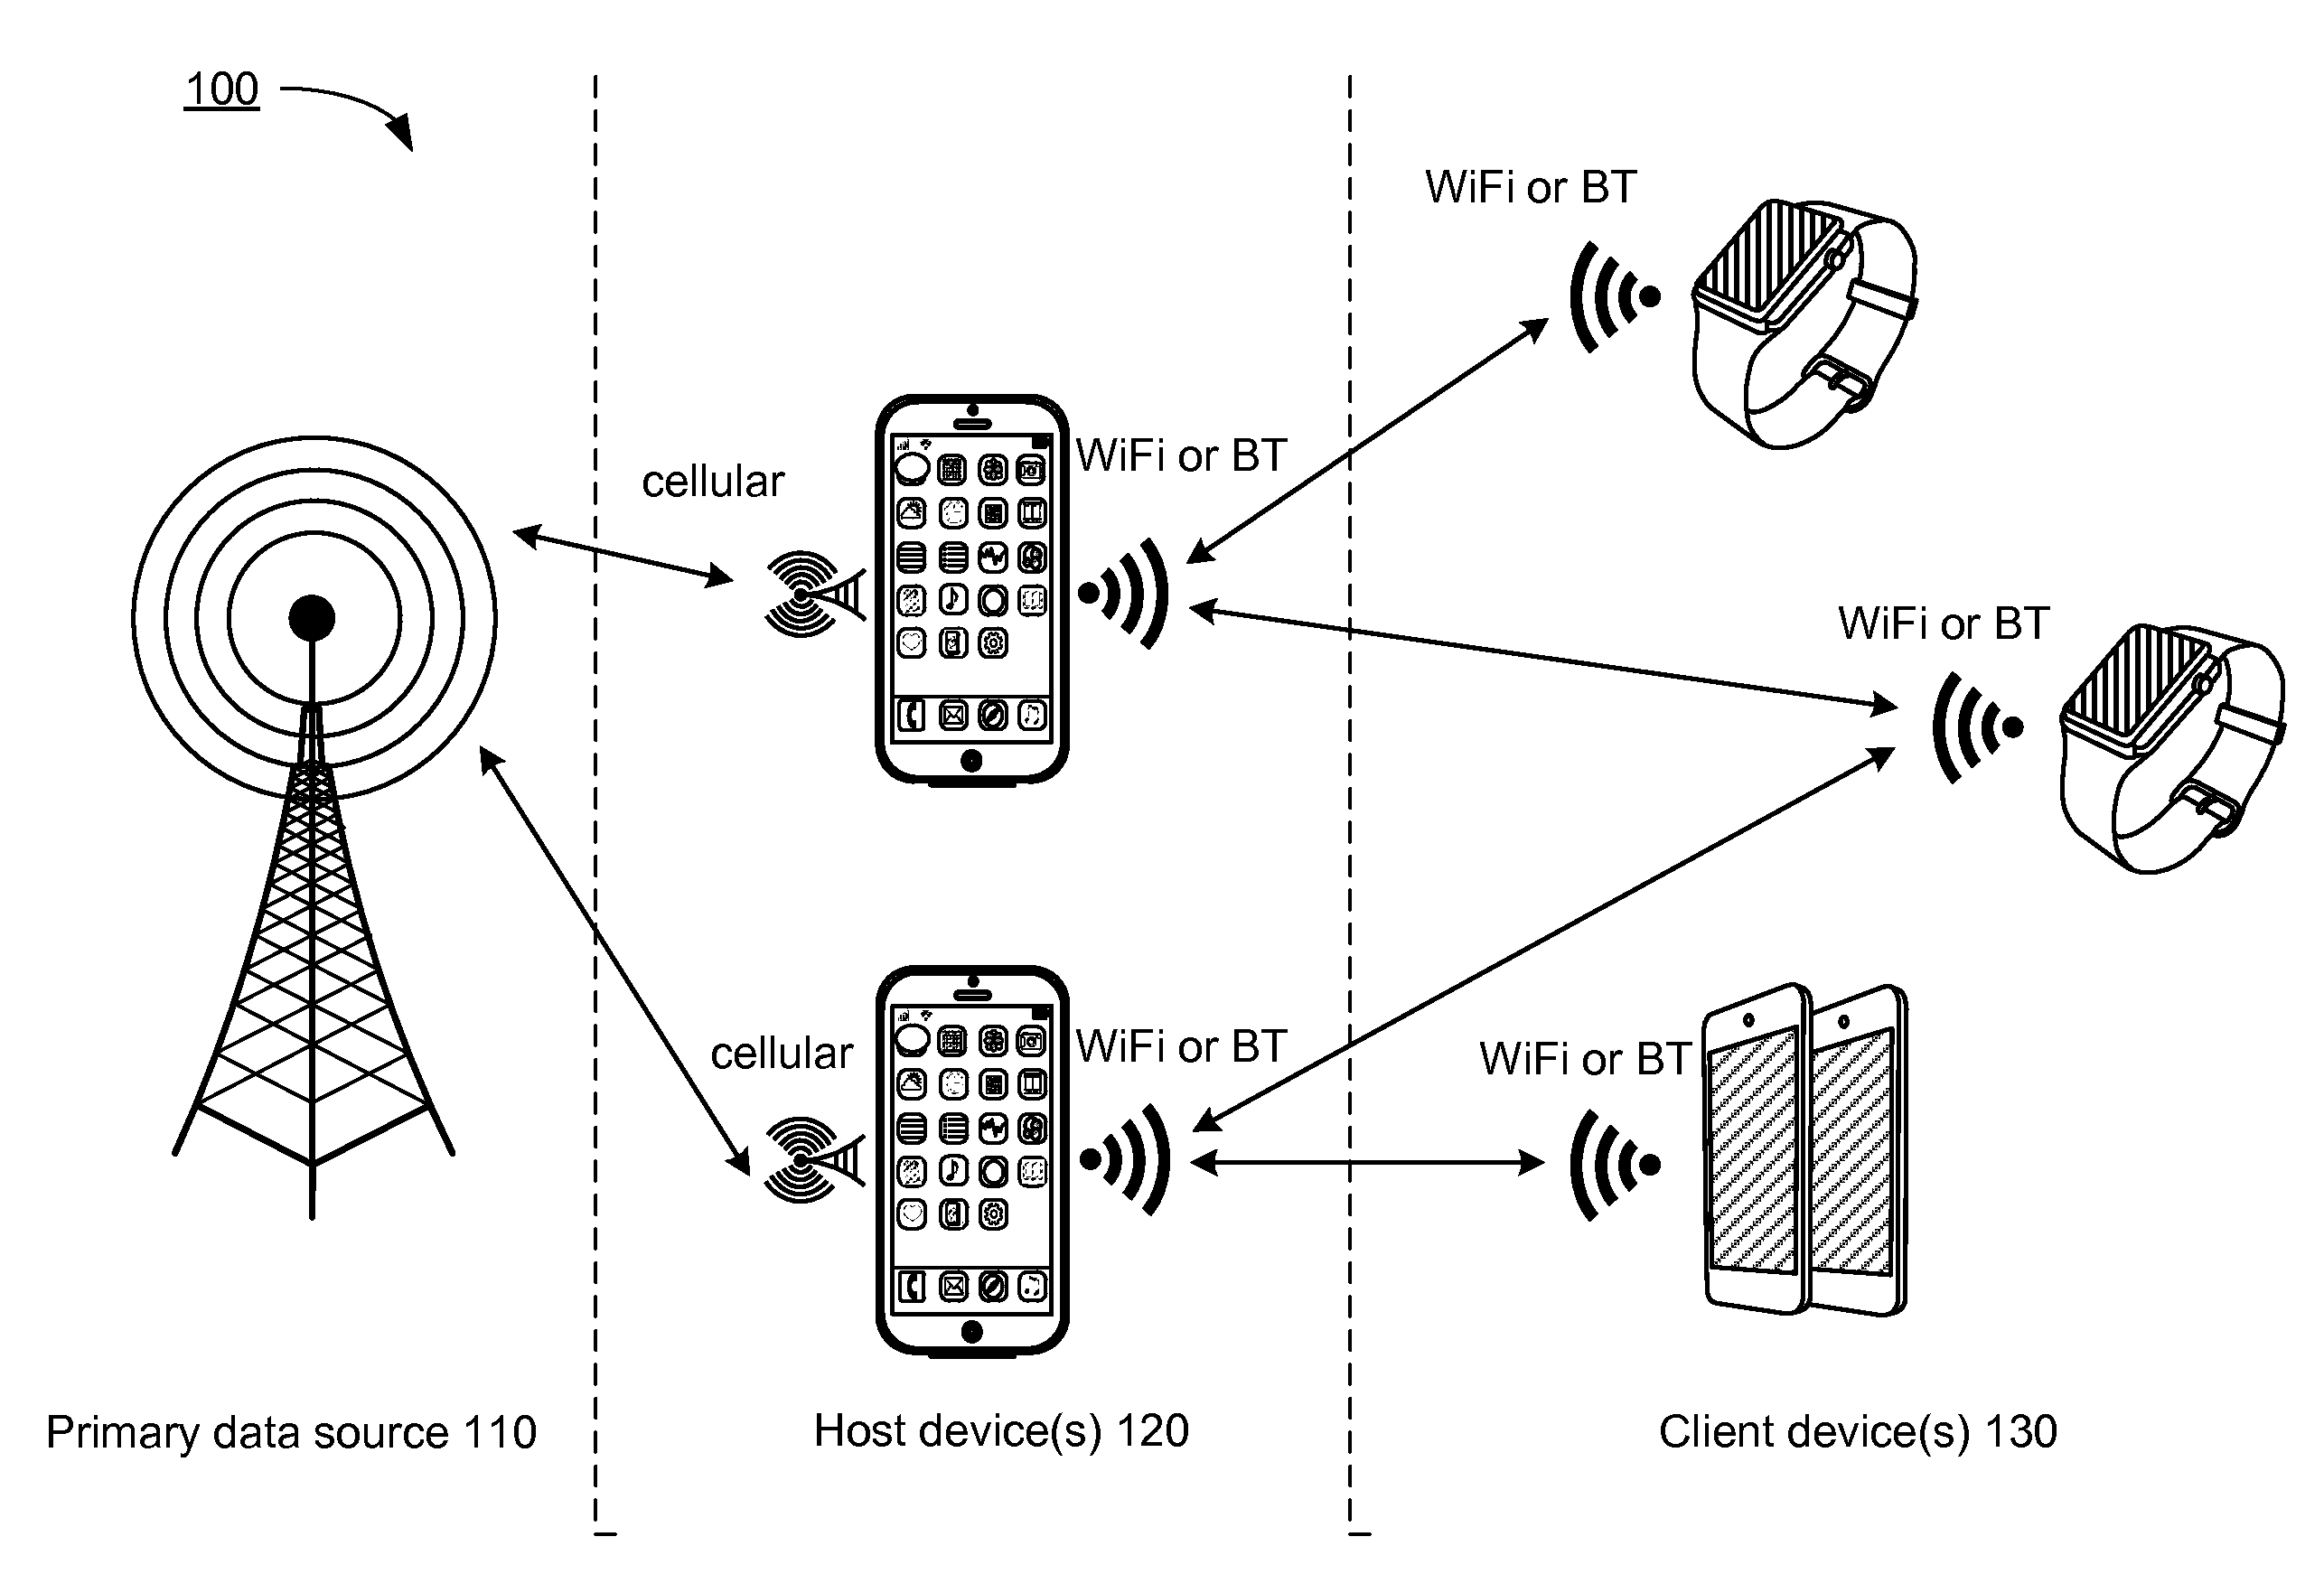 Network bandwidth sharing for small mobile devices